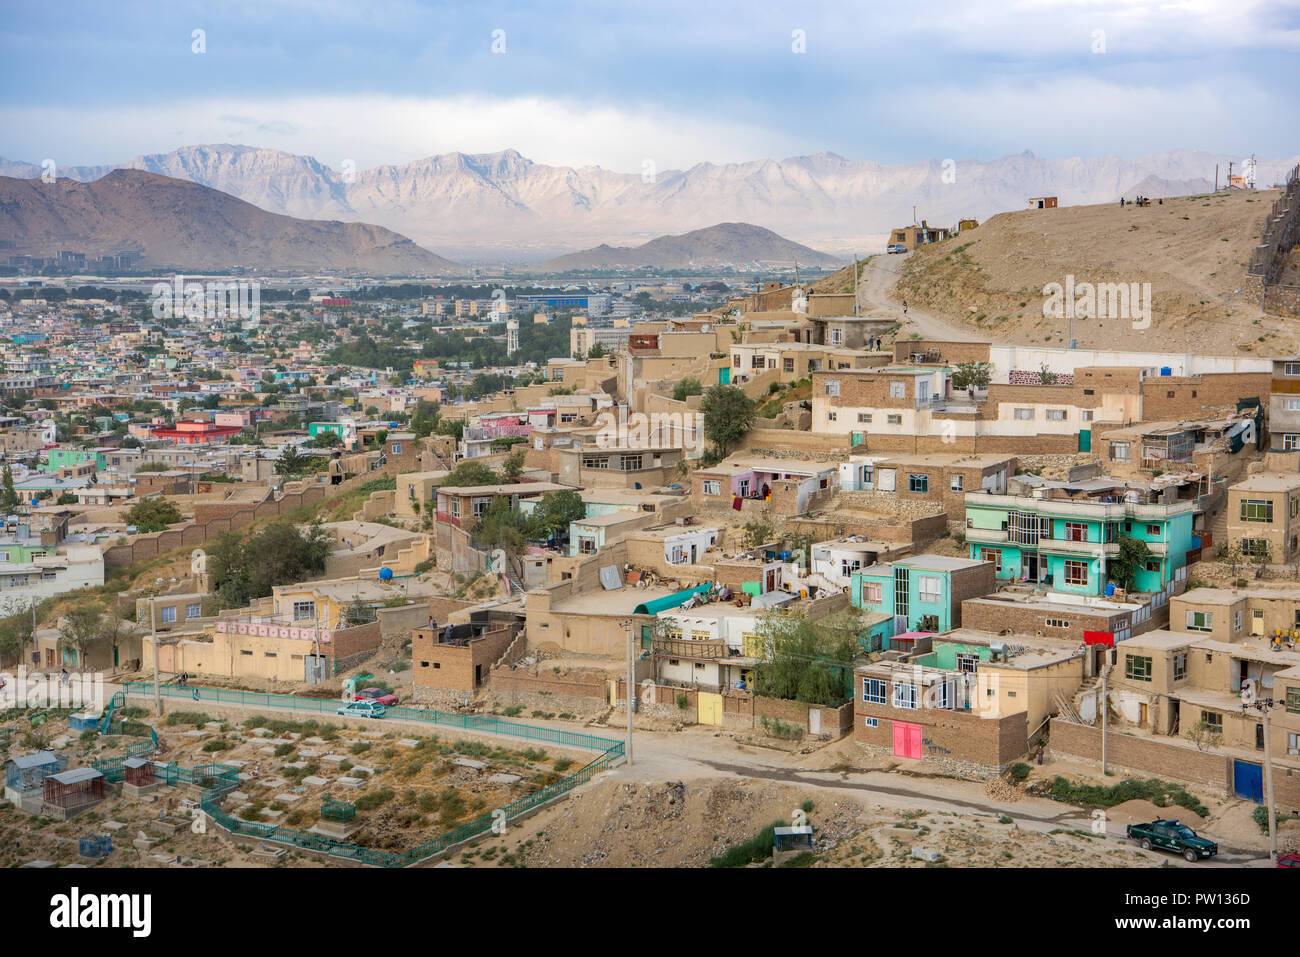 Kabul Afghanistan city scape skyline, capital Kabul hills and mountains with houses and buildings Stock Photo